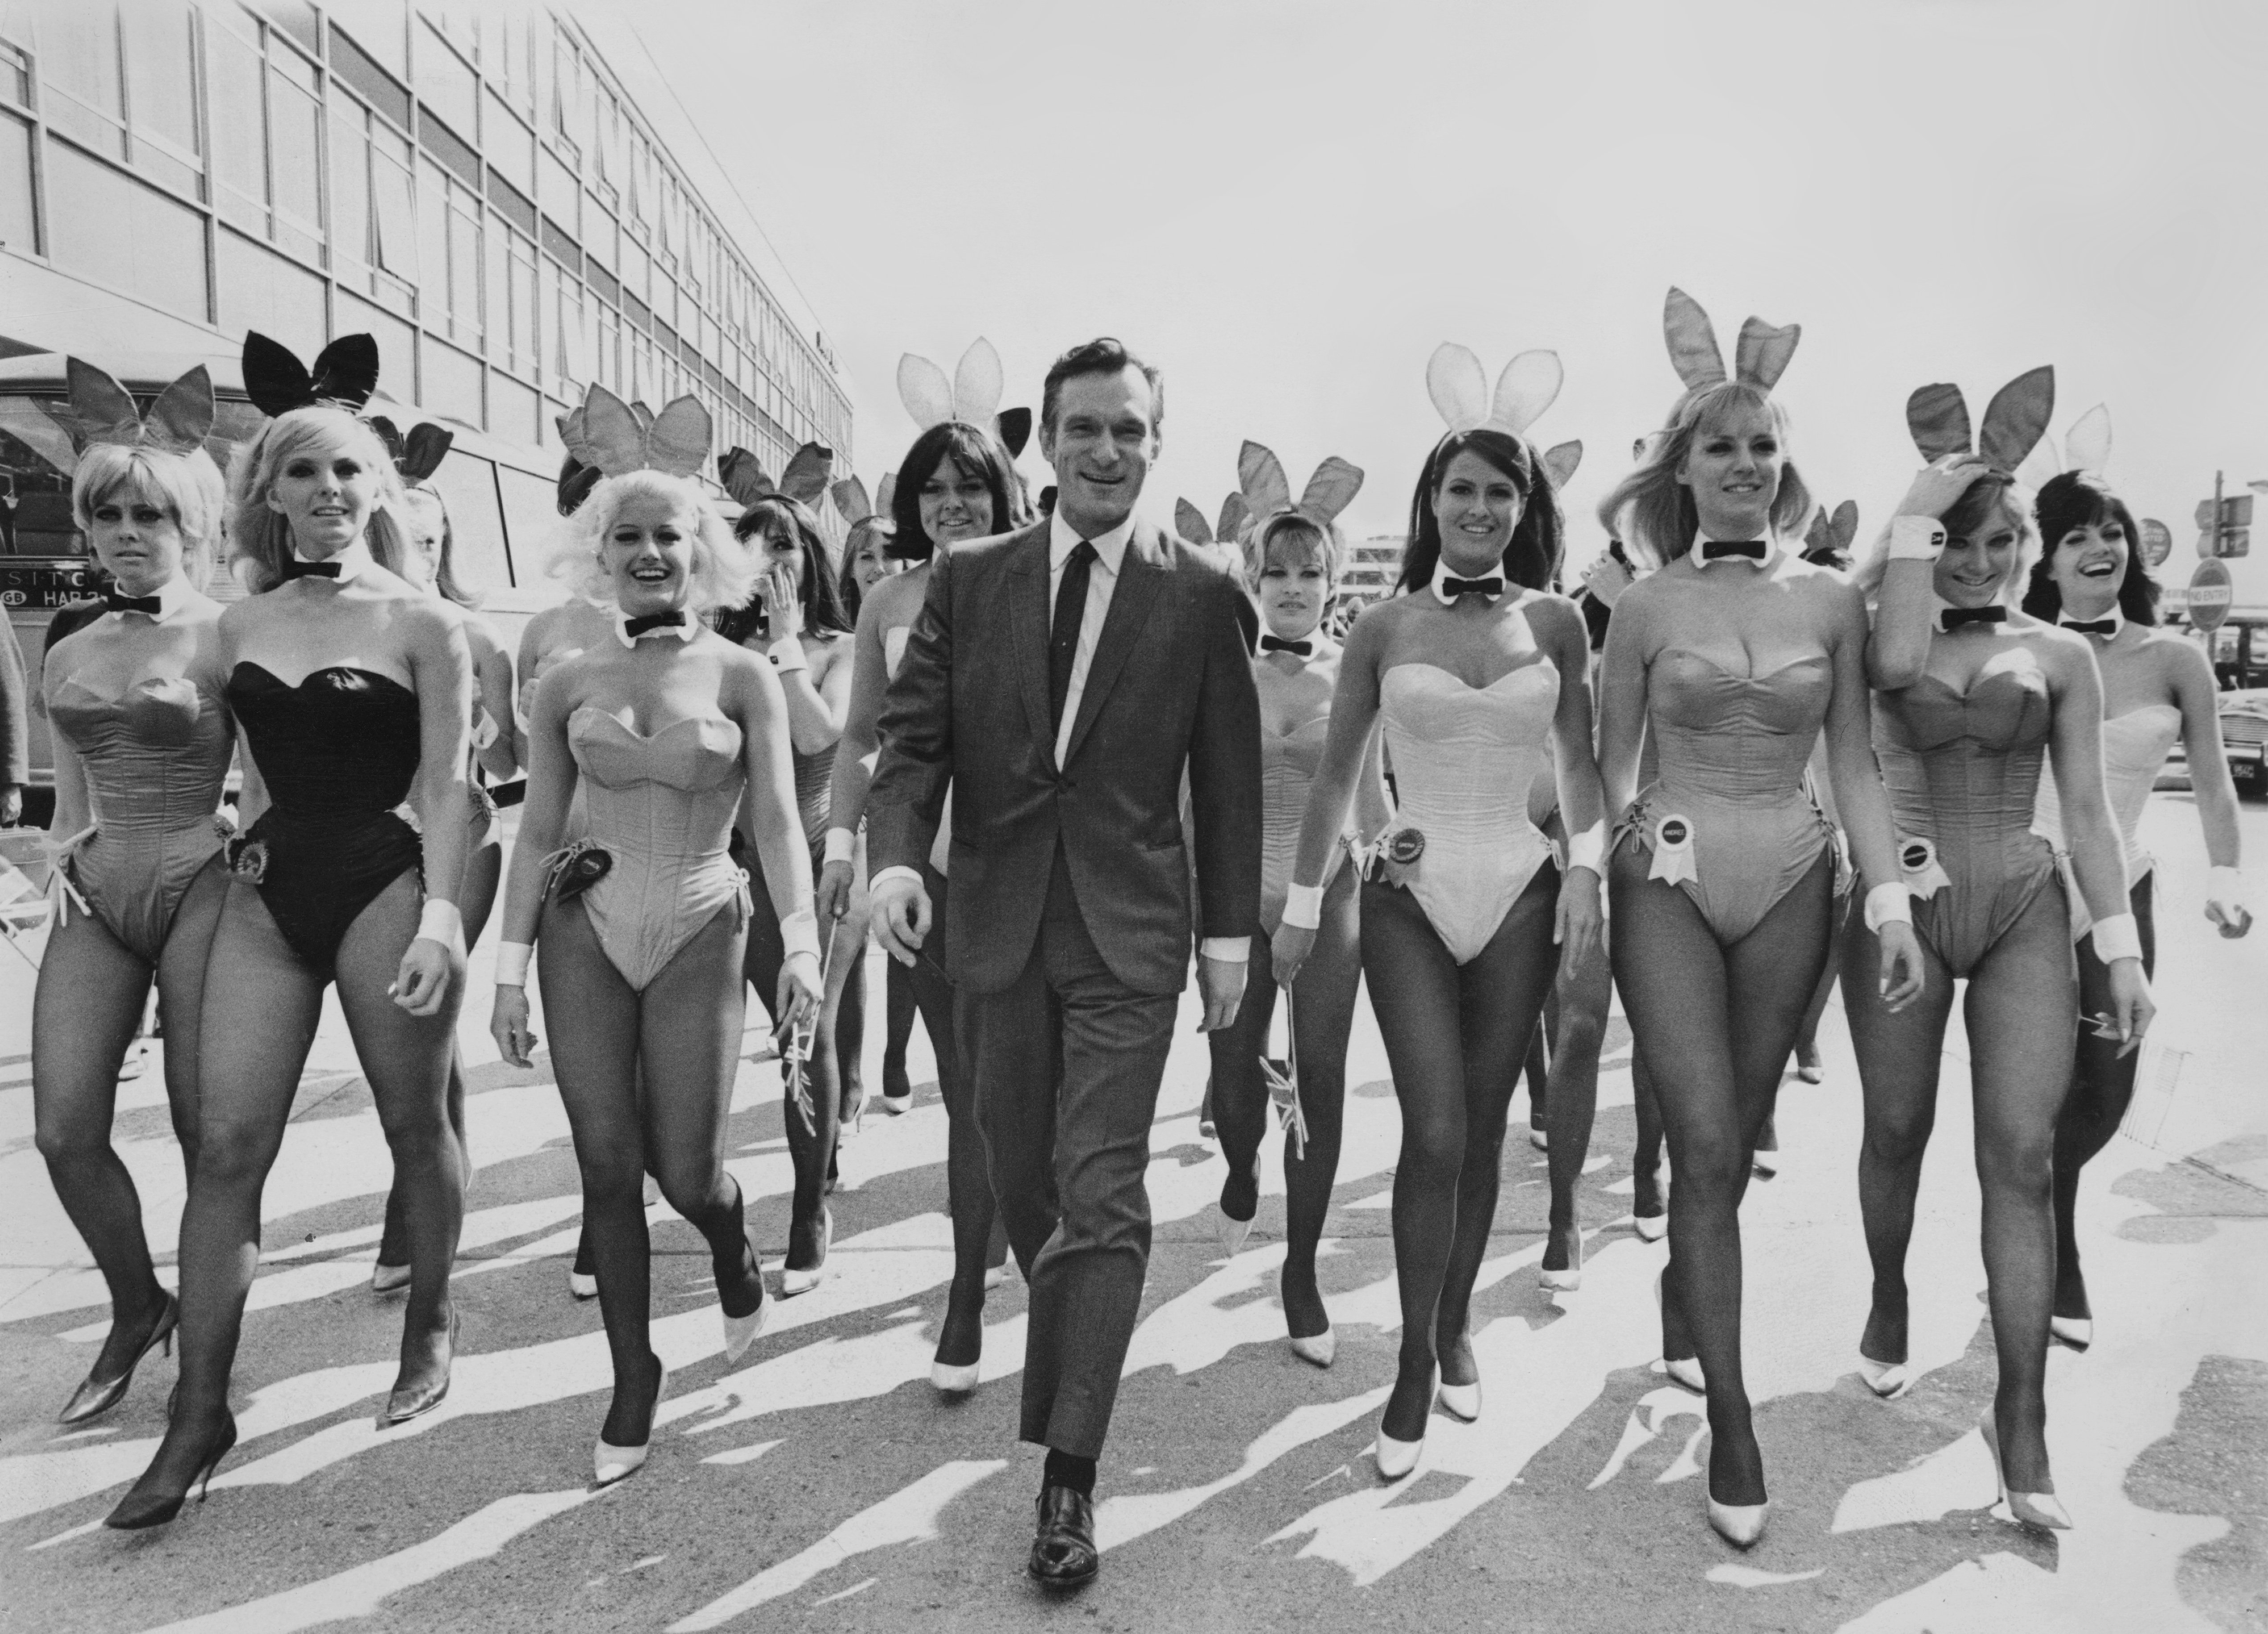 Hugh Hefner arrives at London Airport from Chicago with an entourage of Playboy Bunnies, in 1966, for the opening of the London Playboy Club on Park Lane | Source: Getty Images